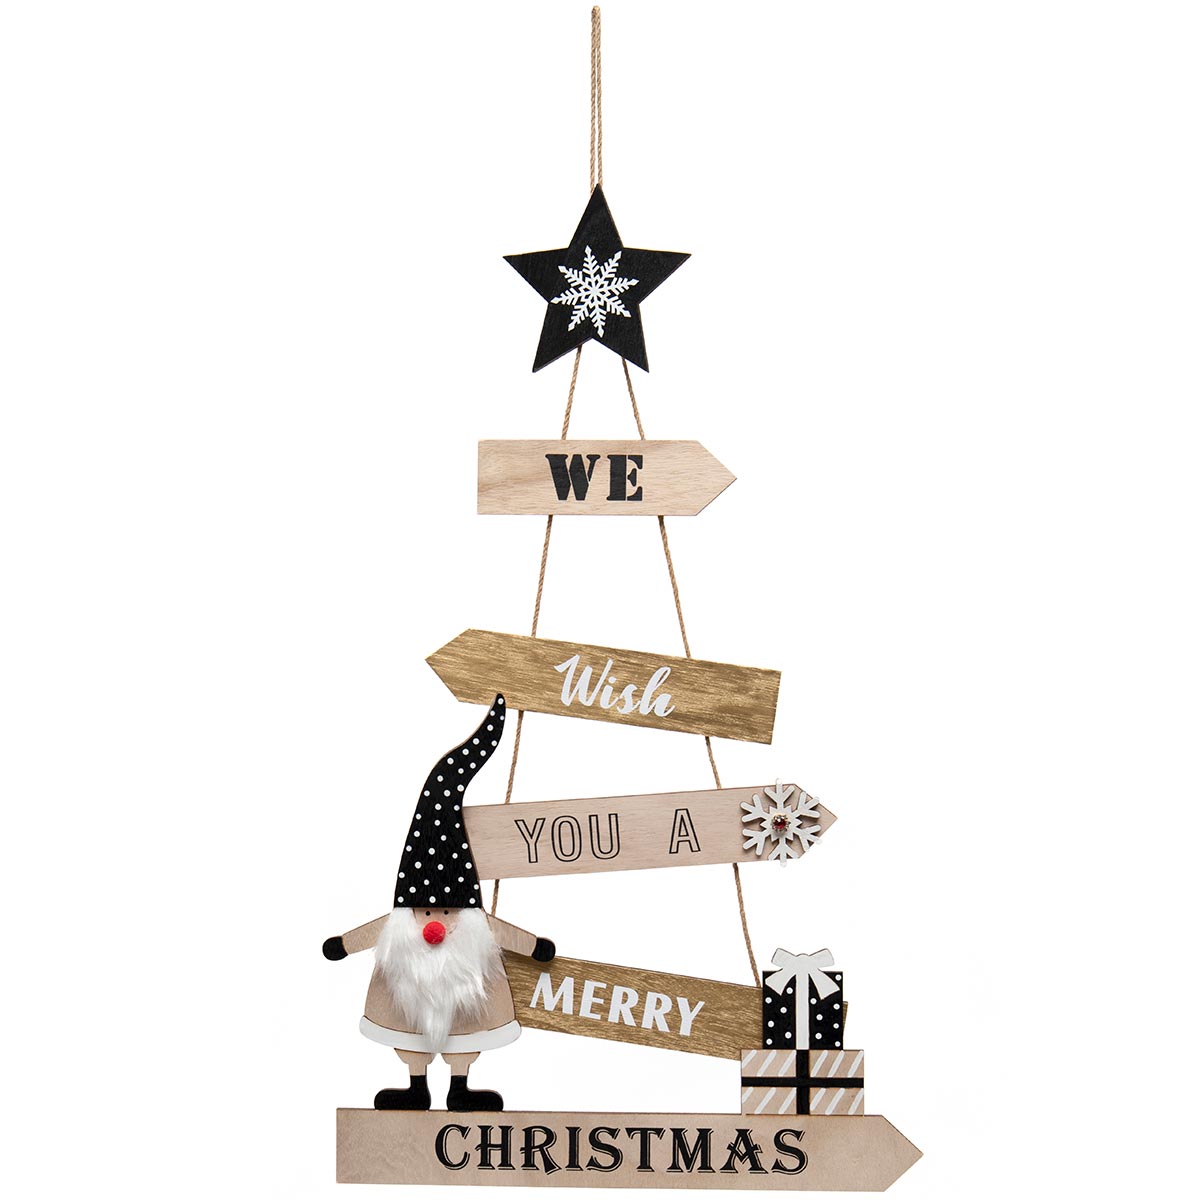 !WE WISH YOU A MERRY CHRISTMAS GNOME WOOD HANGING SIGN